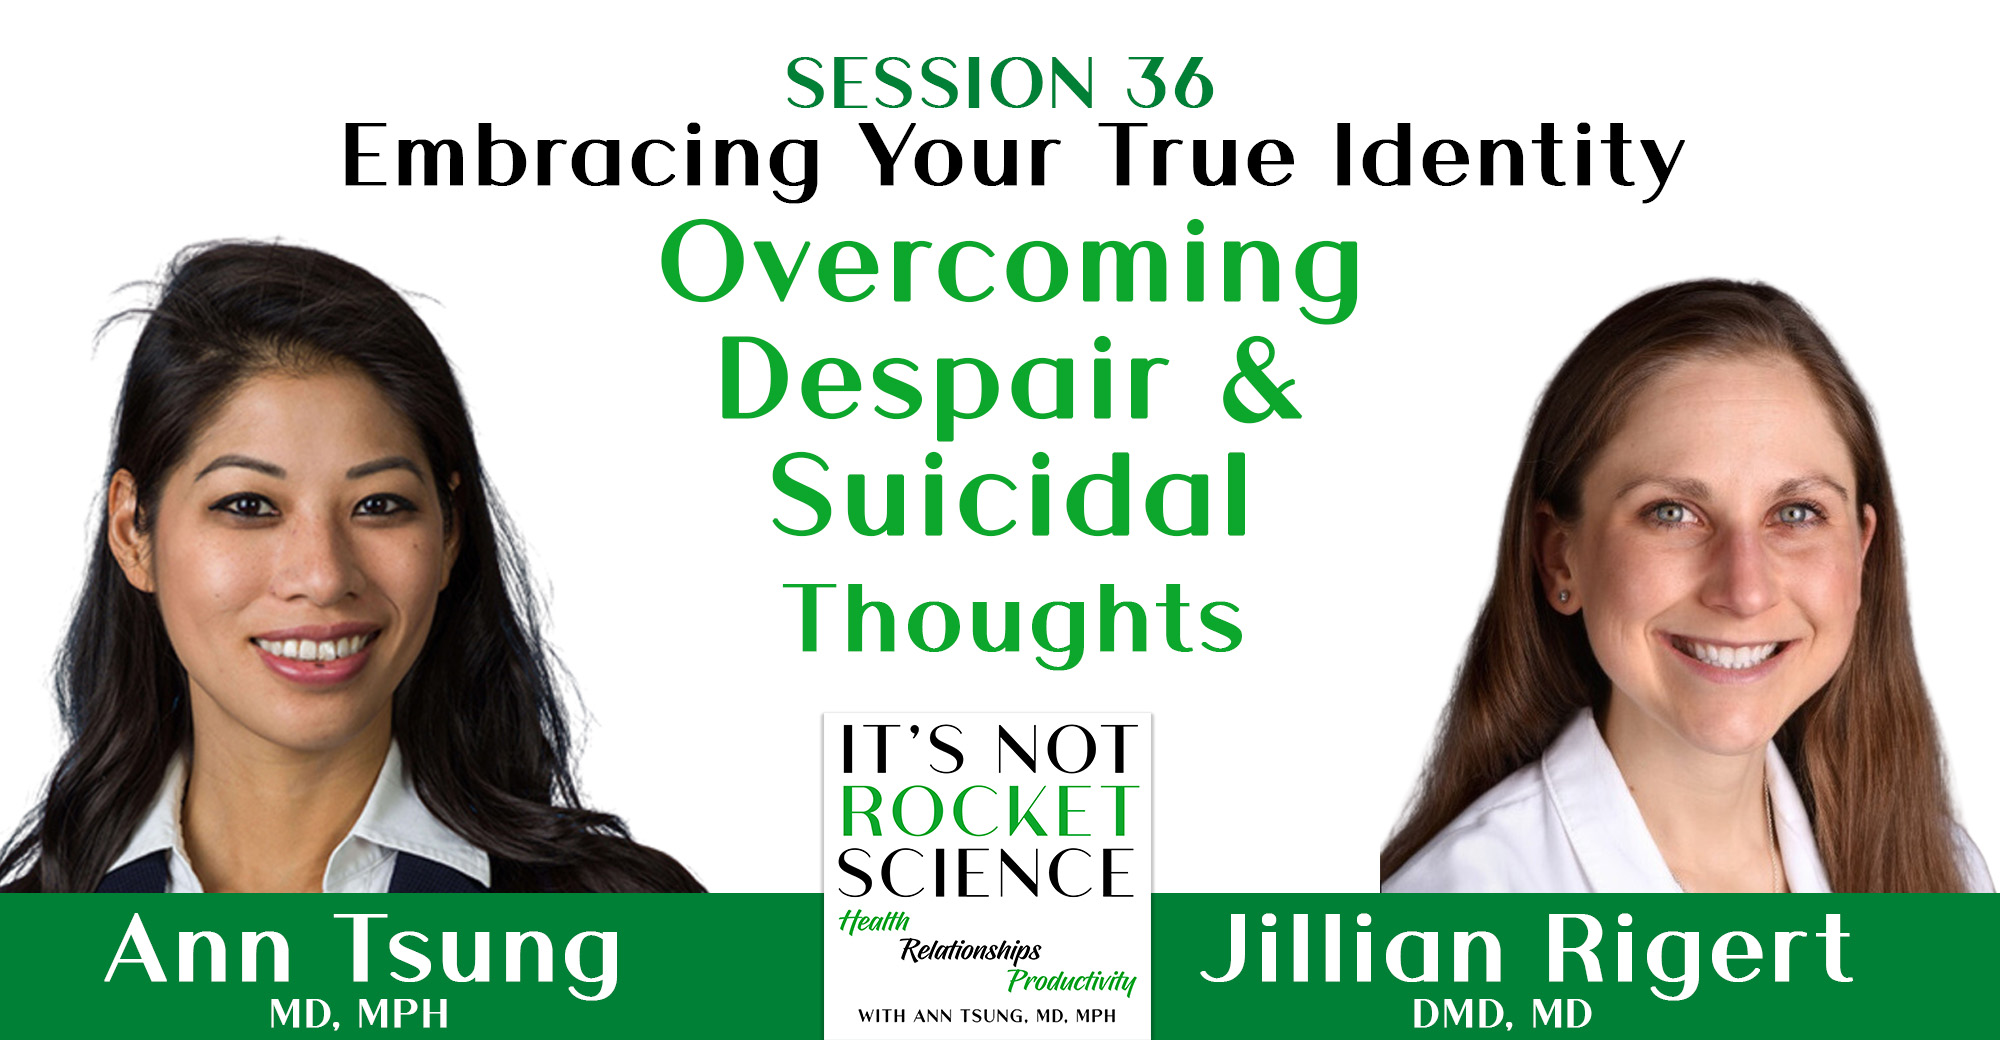 Embracing Your True Identity - Overcoming Despair and Suicidal Thoughts with Jillian Rigert